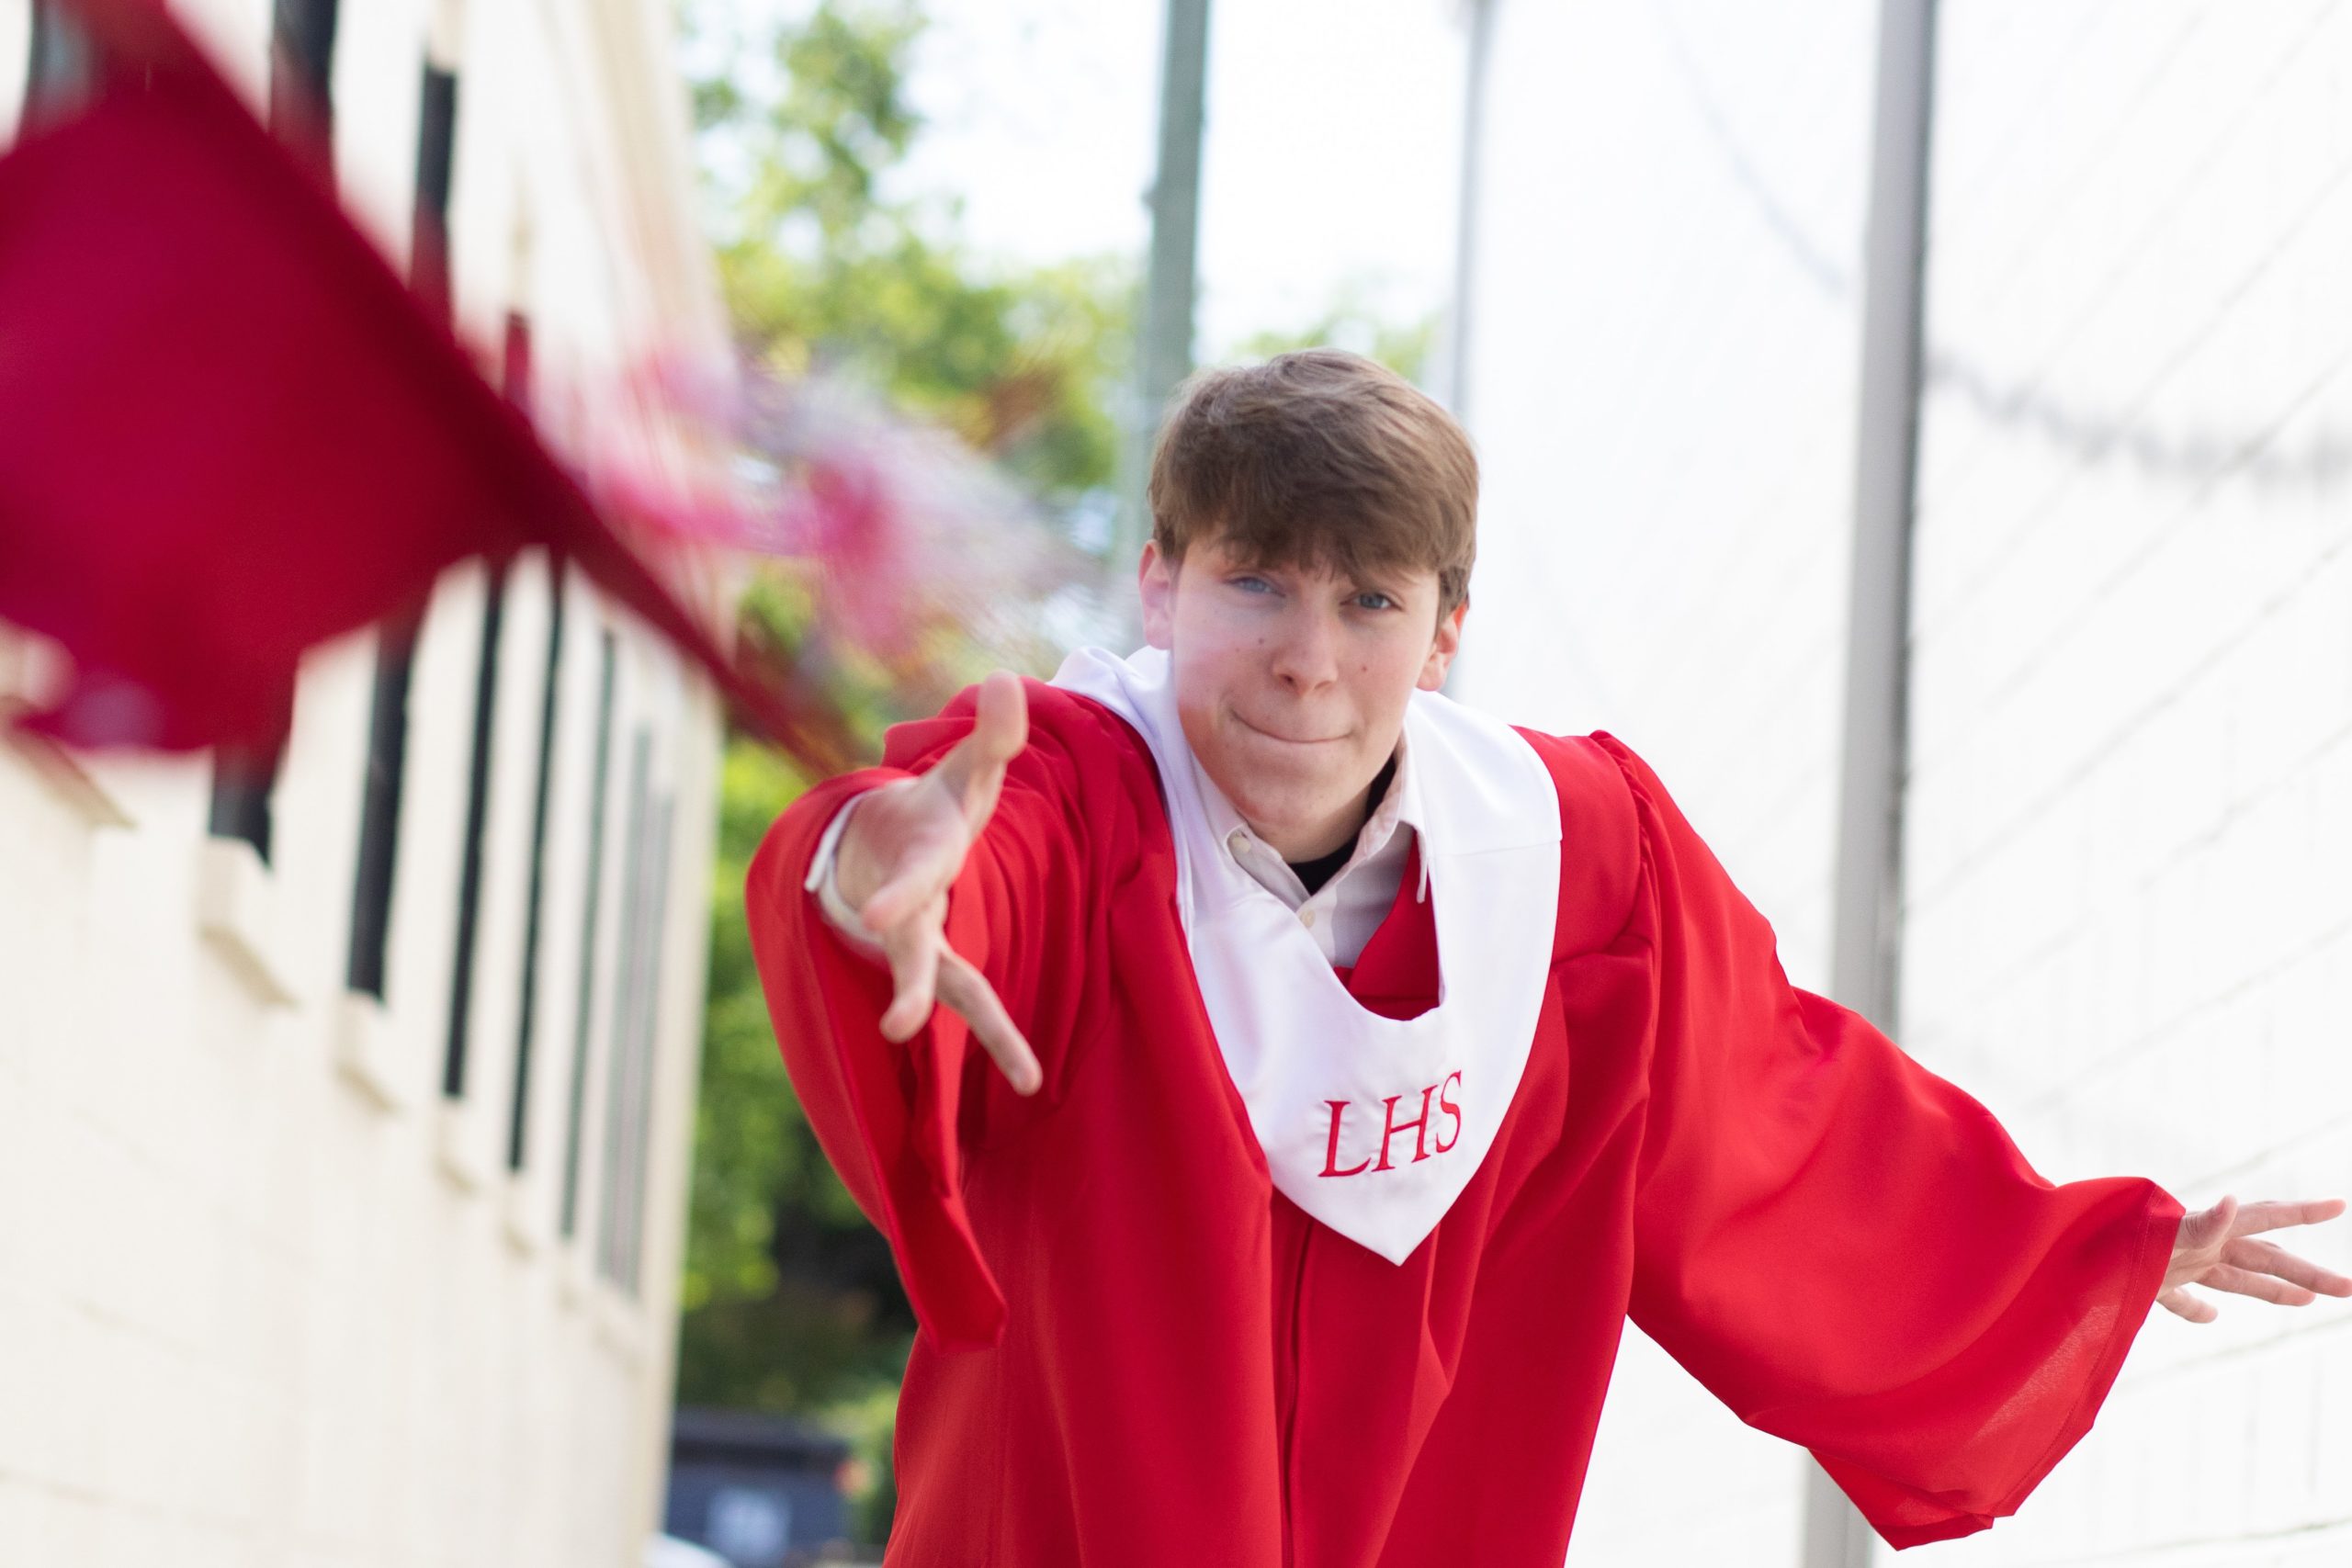 High School Senior throwing his cap at the camera. Photography by A Focused Life Photography in Monroe, GA.